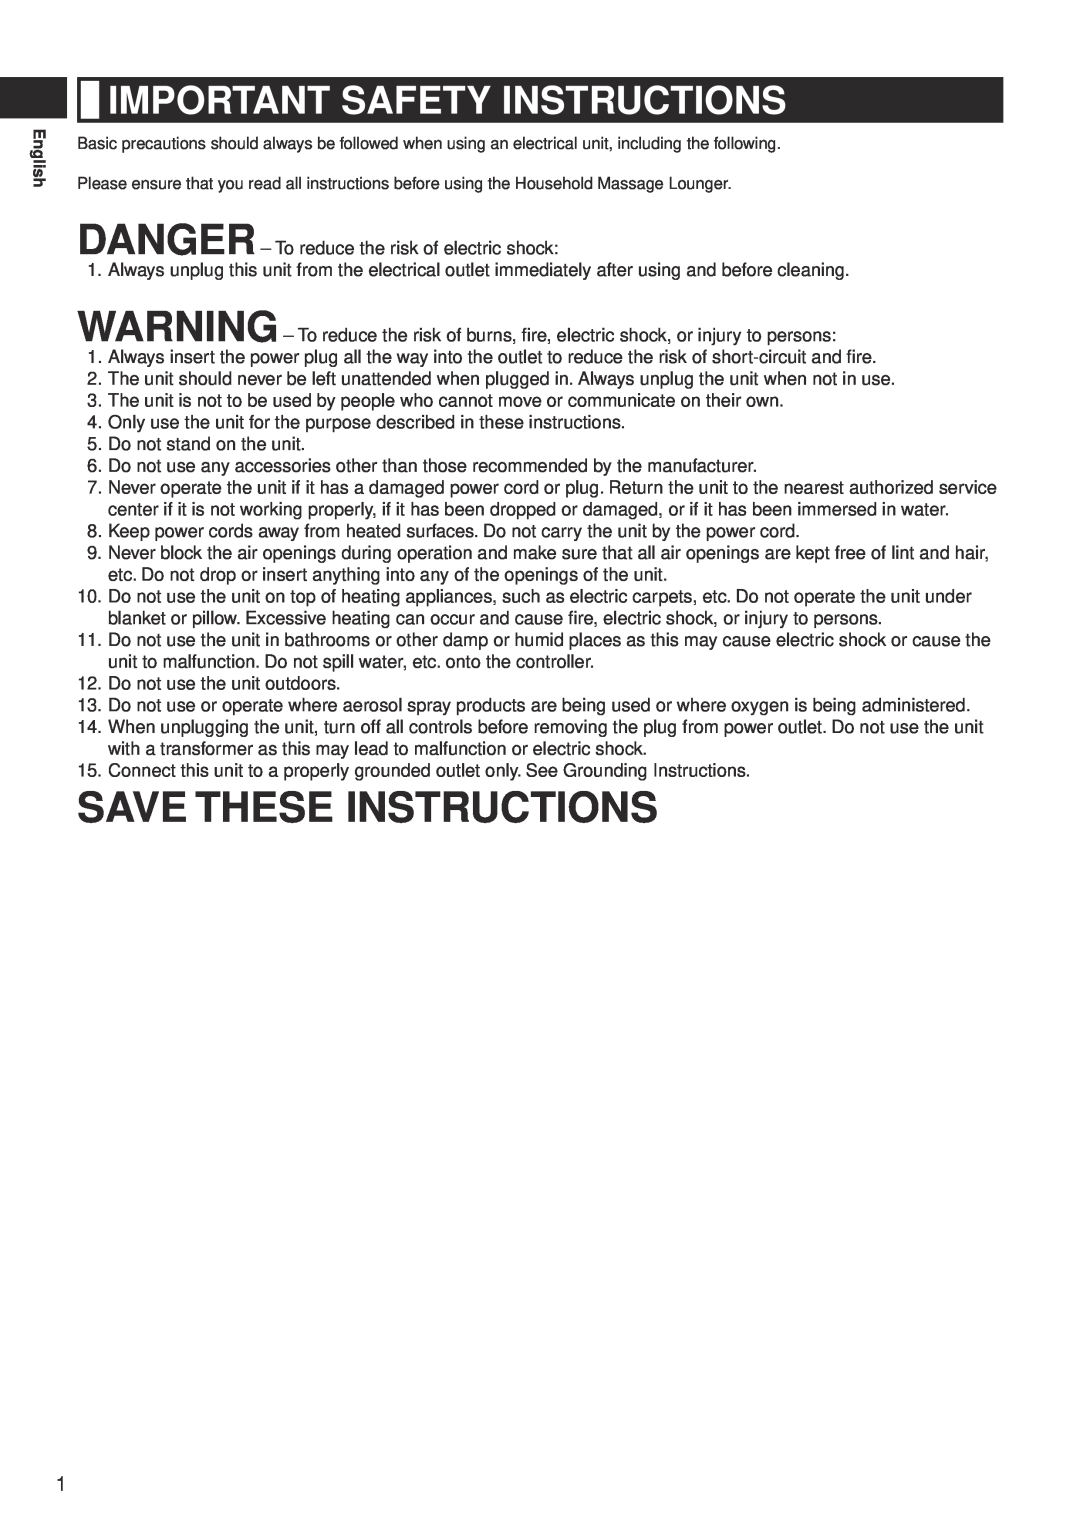 Panasonic EP-MS40 manual Important Safety Instructions, Save These Instructions 